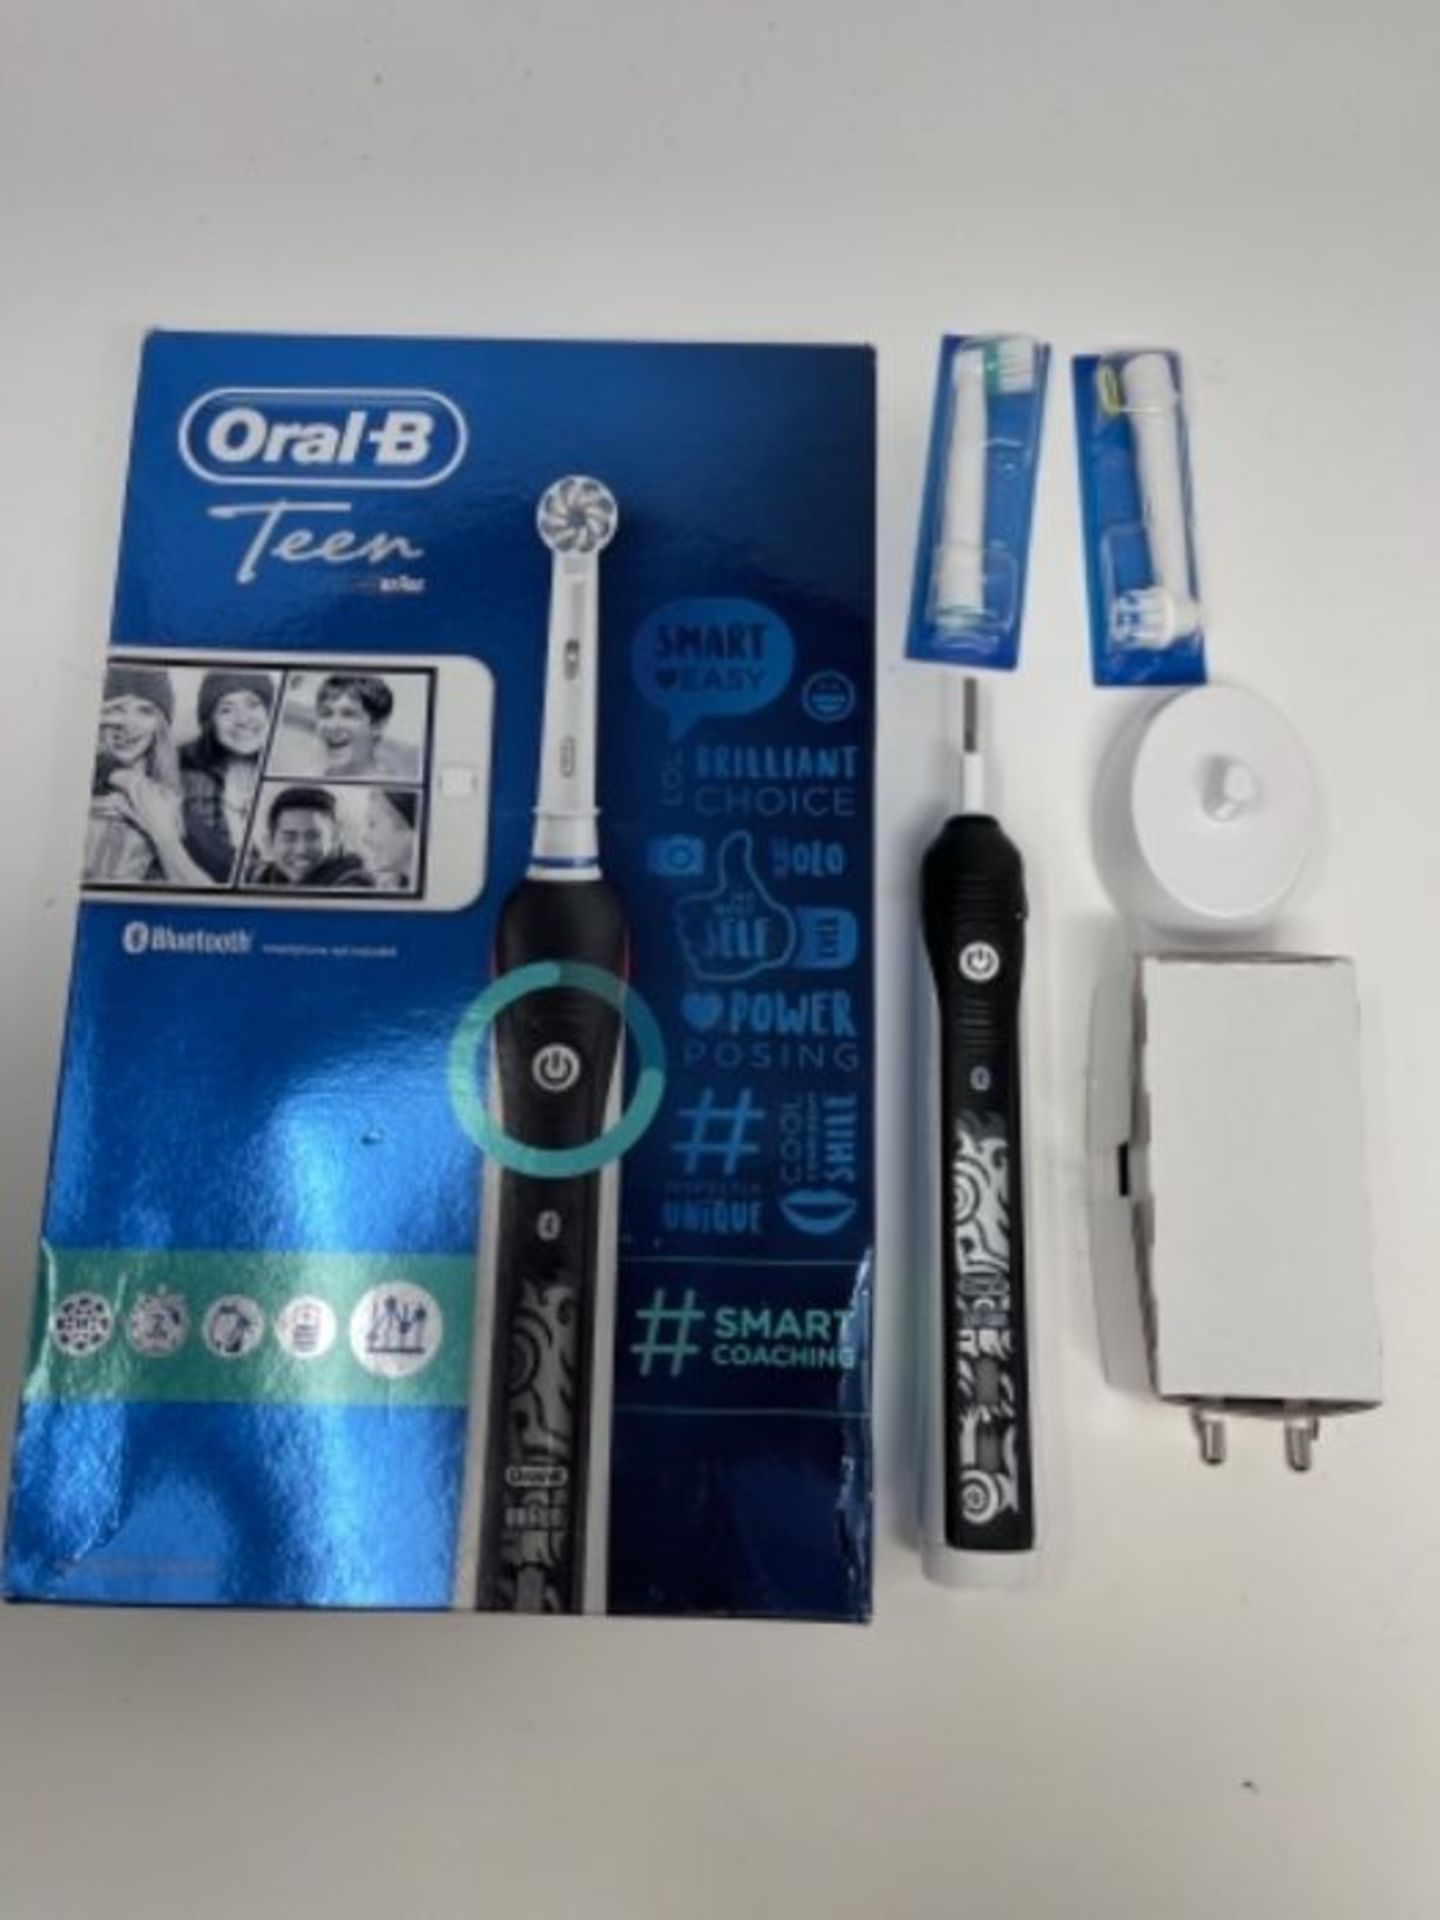 Oral-B TEEN Electric Toothbrush, Powered By Braun - Image 2 of 2